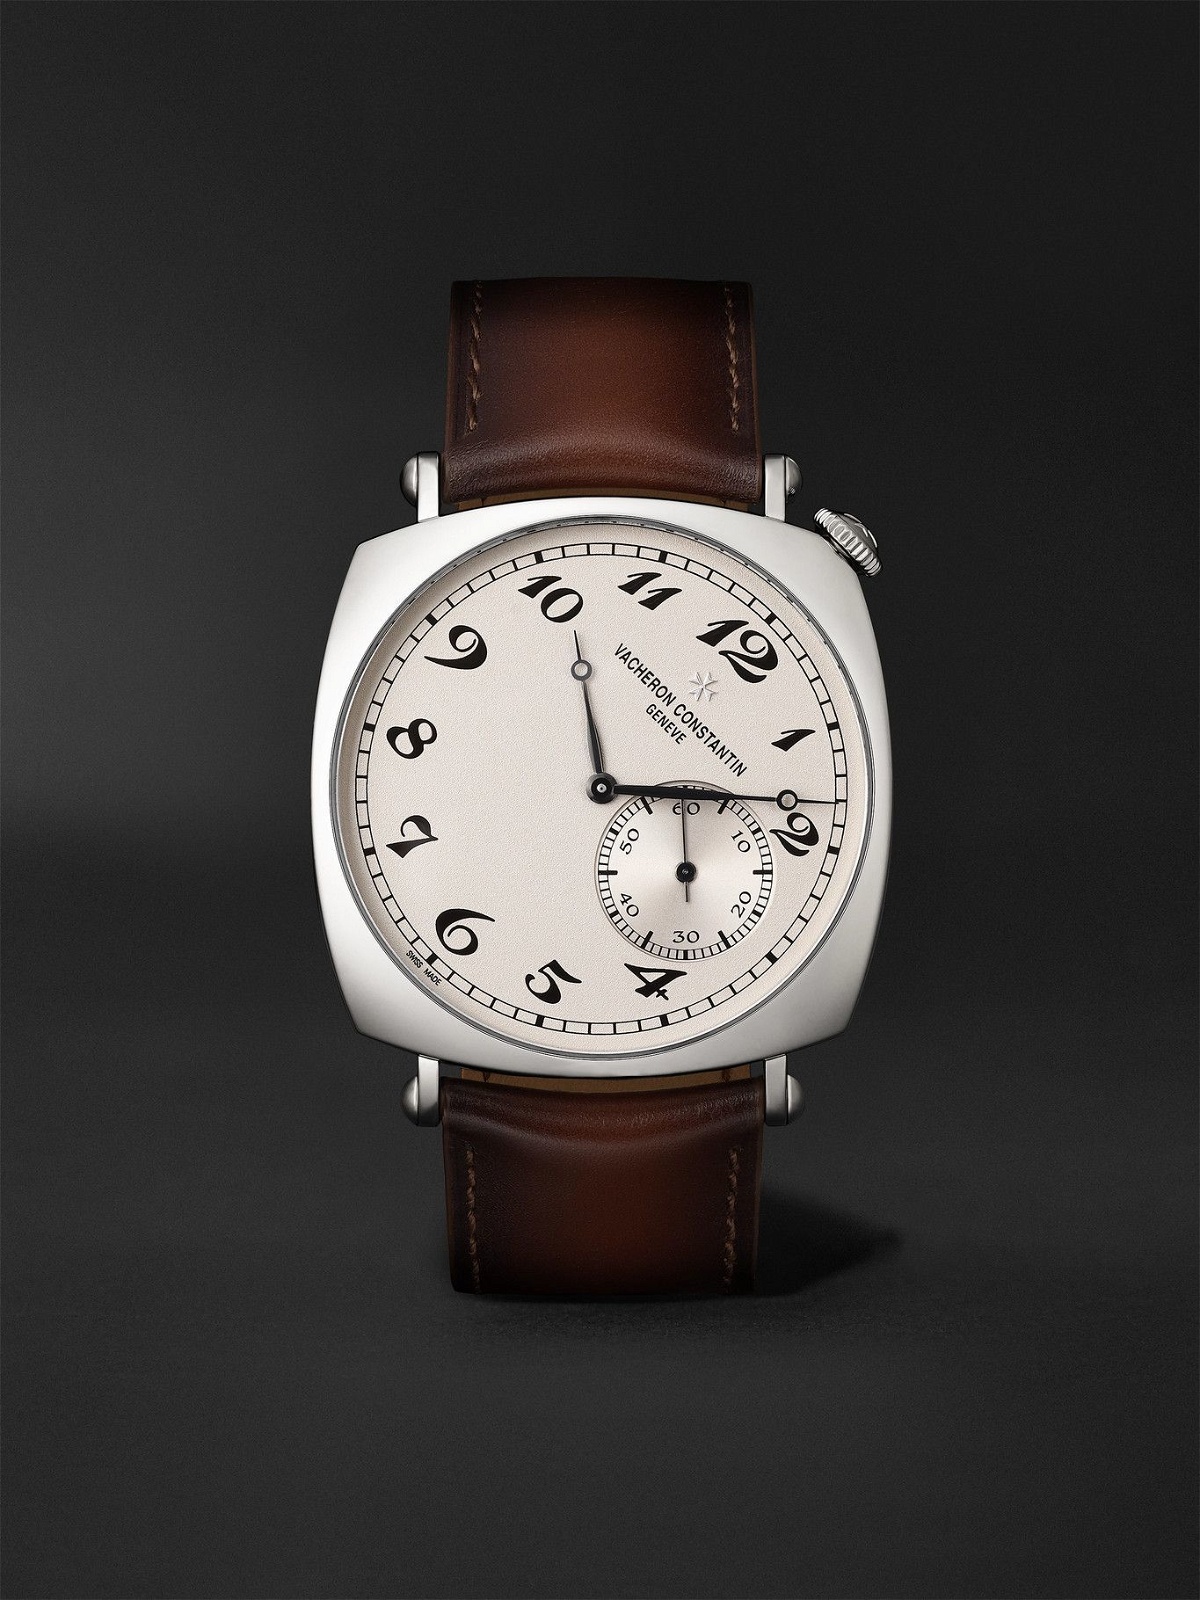 Photo: VACHERON CONSTANTIN - Historiques American 1921 Hand-Wound 40mm 18-Karat White Gold and Leather Watch, Ref. No. 82035/000G-B735